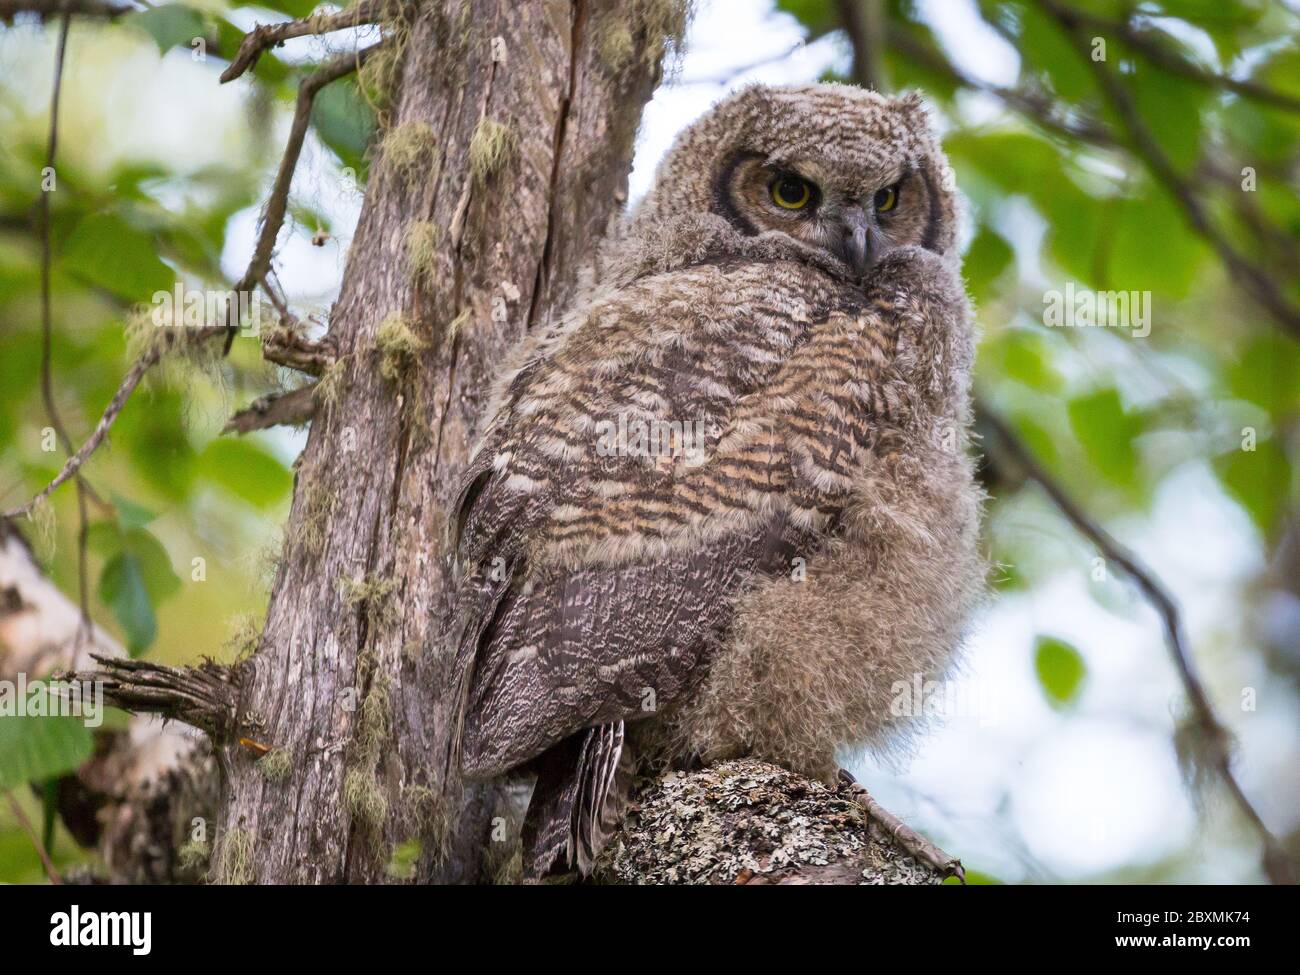 Wild owls in their natural habitat Stock Photo